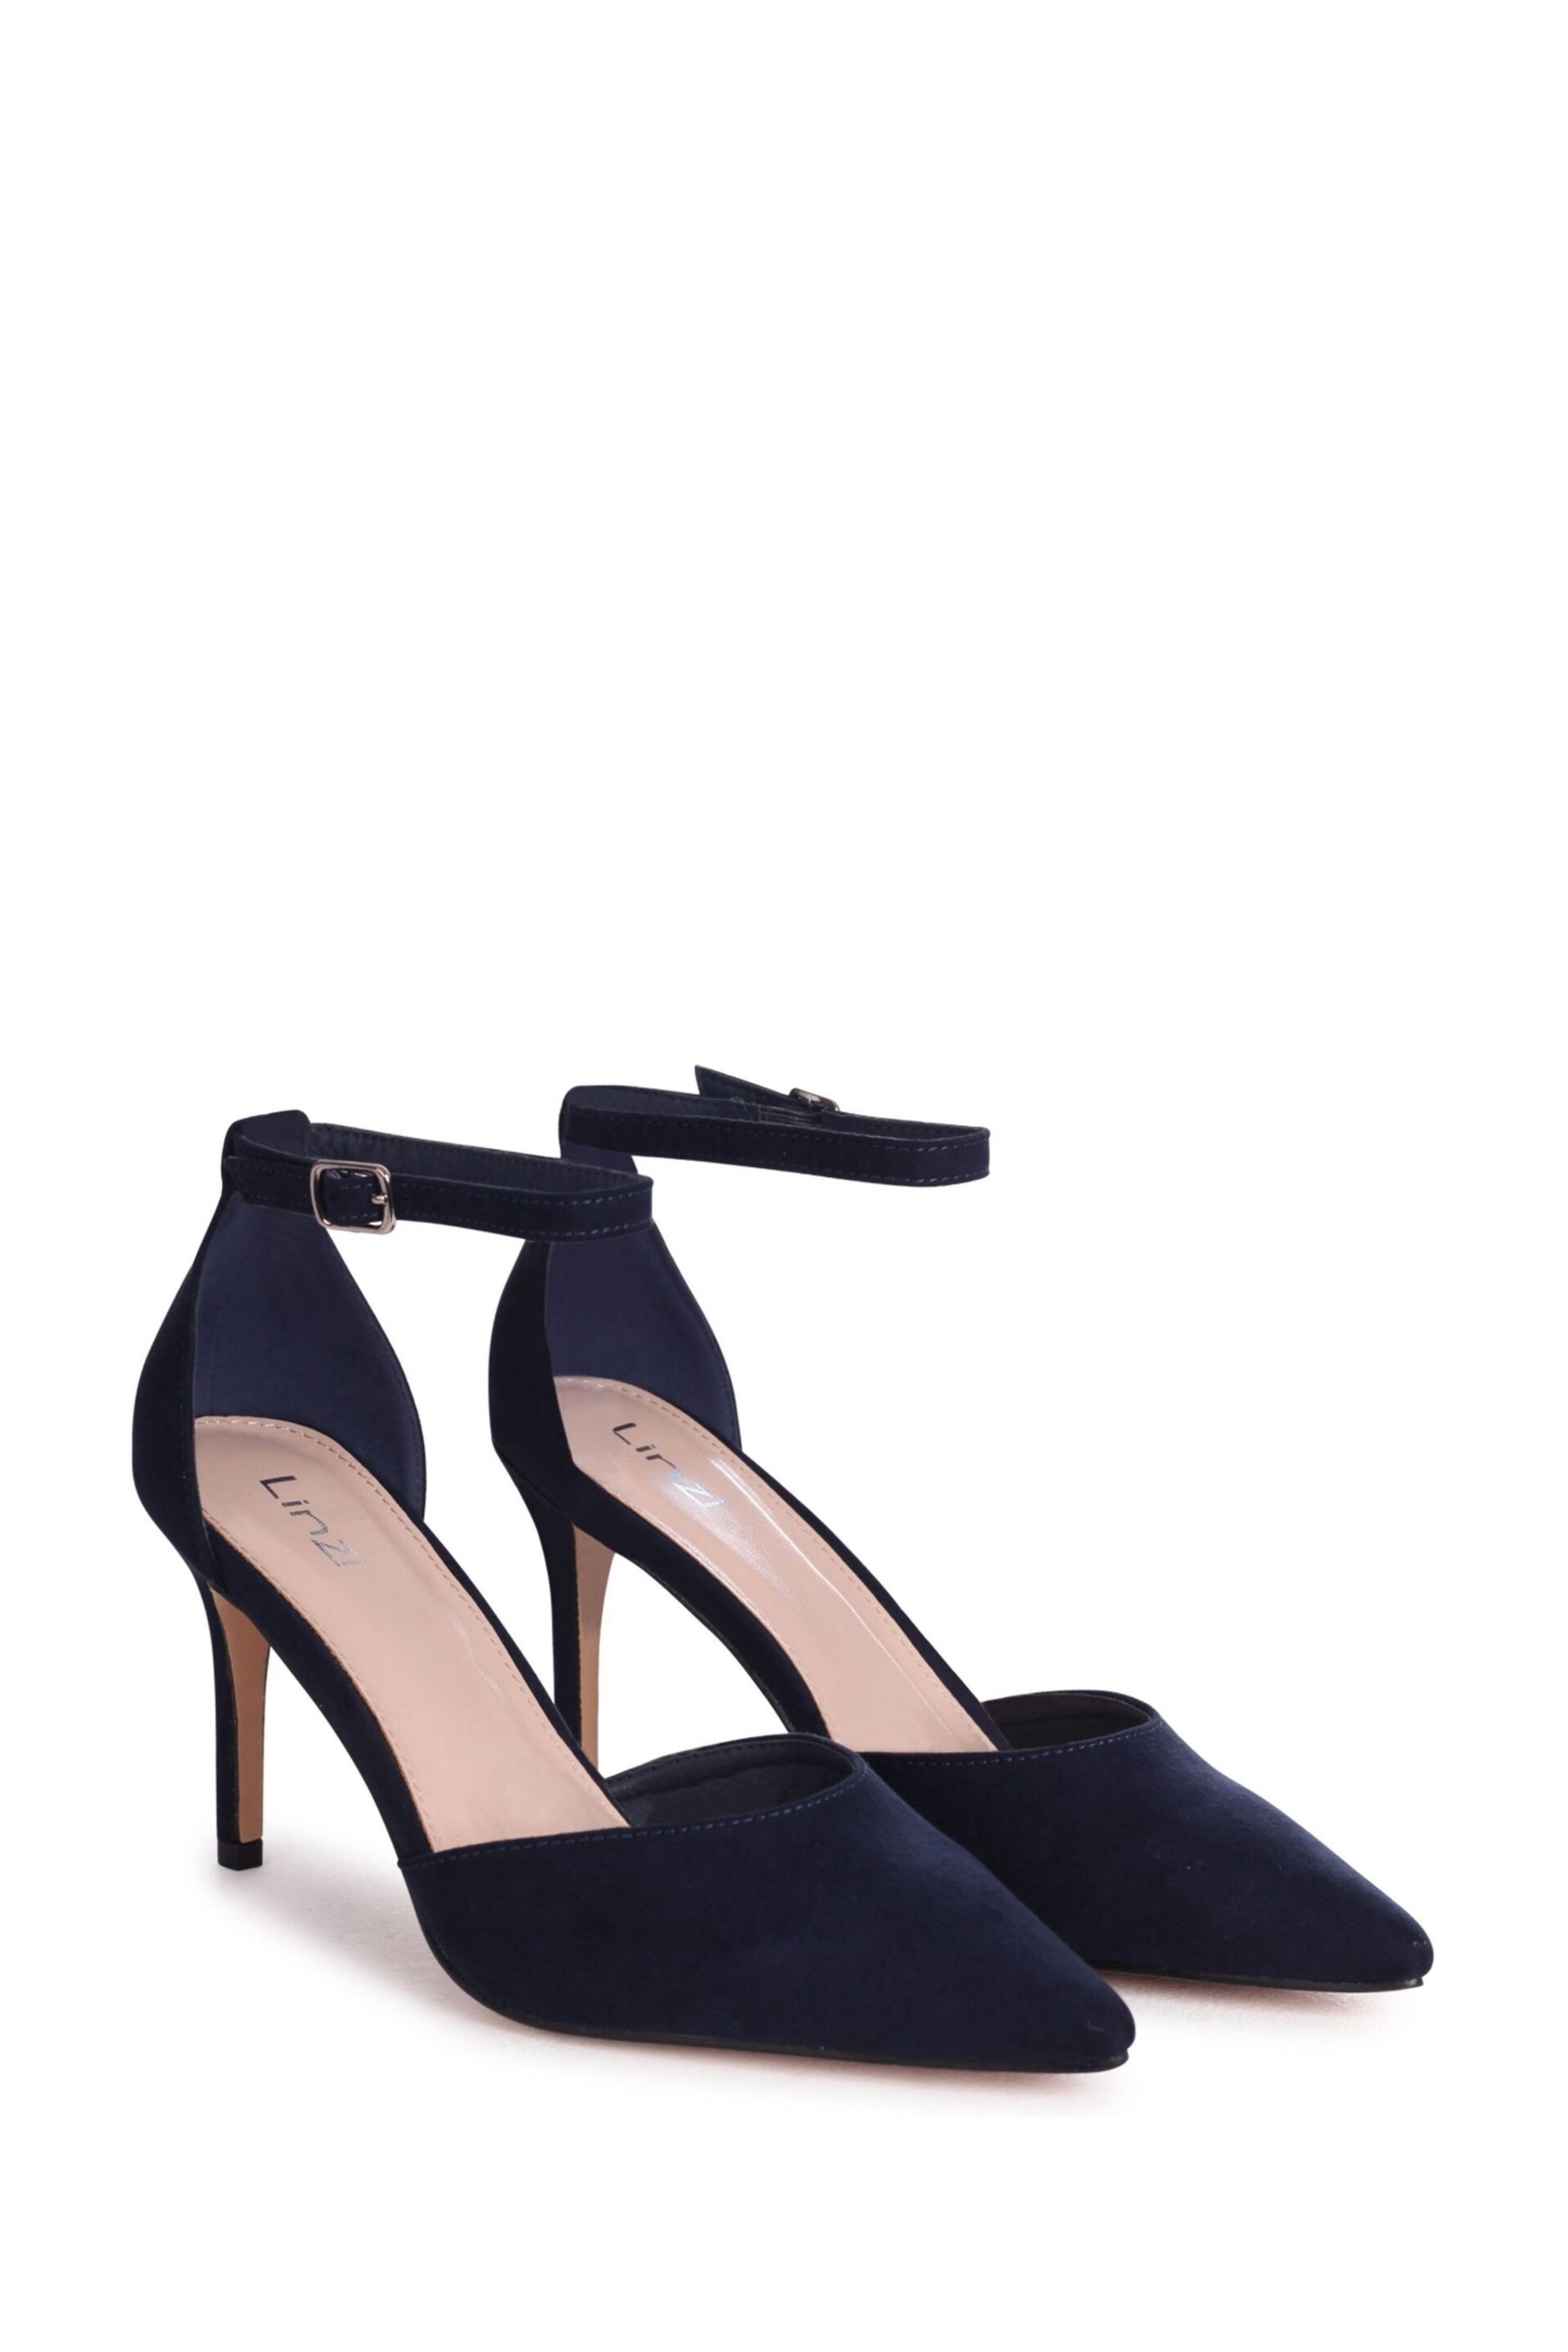 Linzi Blue Maci Stiletto Court Heel With Ankle Strap - Image 3 of 4